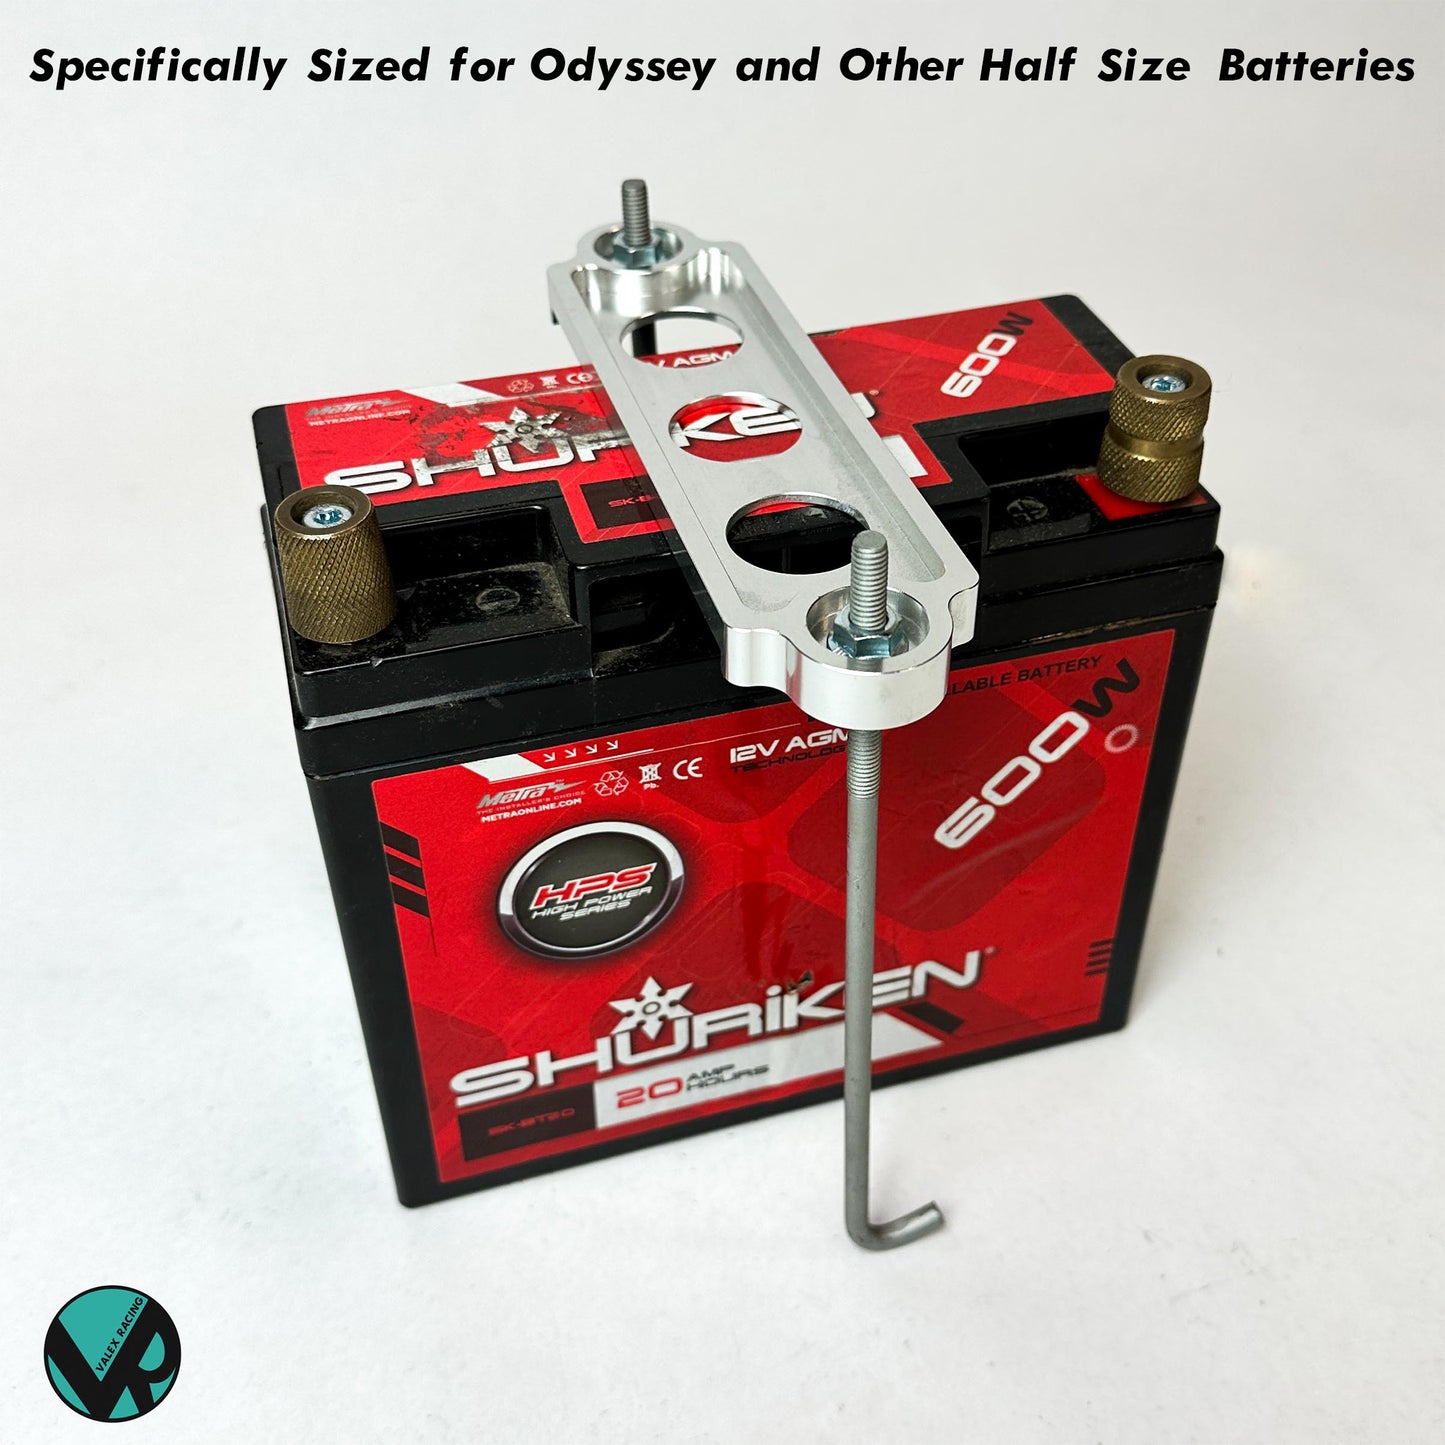 Billet Battery Tie Down & Rod Stay Kit For Odyssey and Other Half Size Batteries 92-00 Honda Civic 94-01 Acura Integra